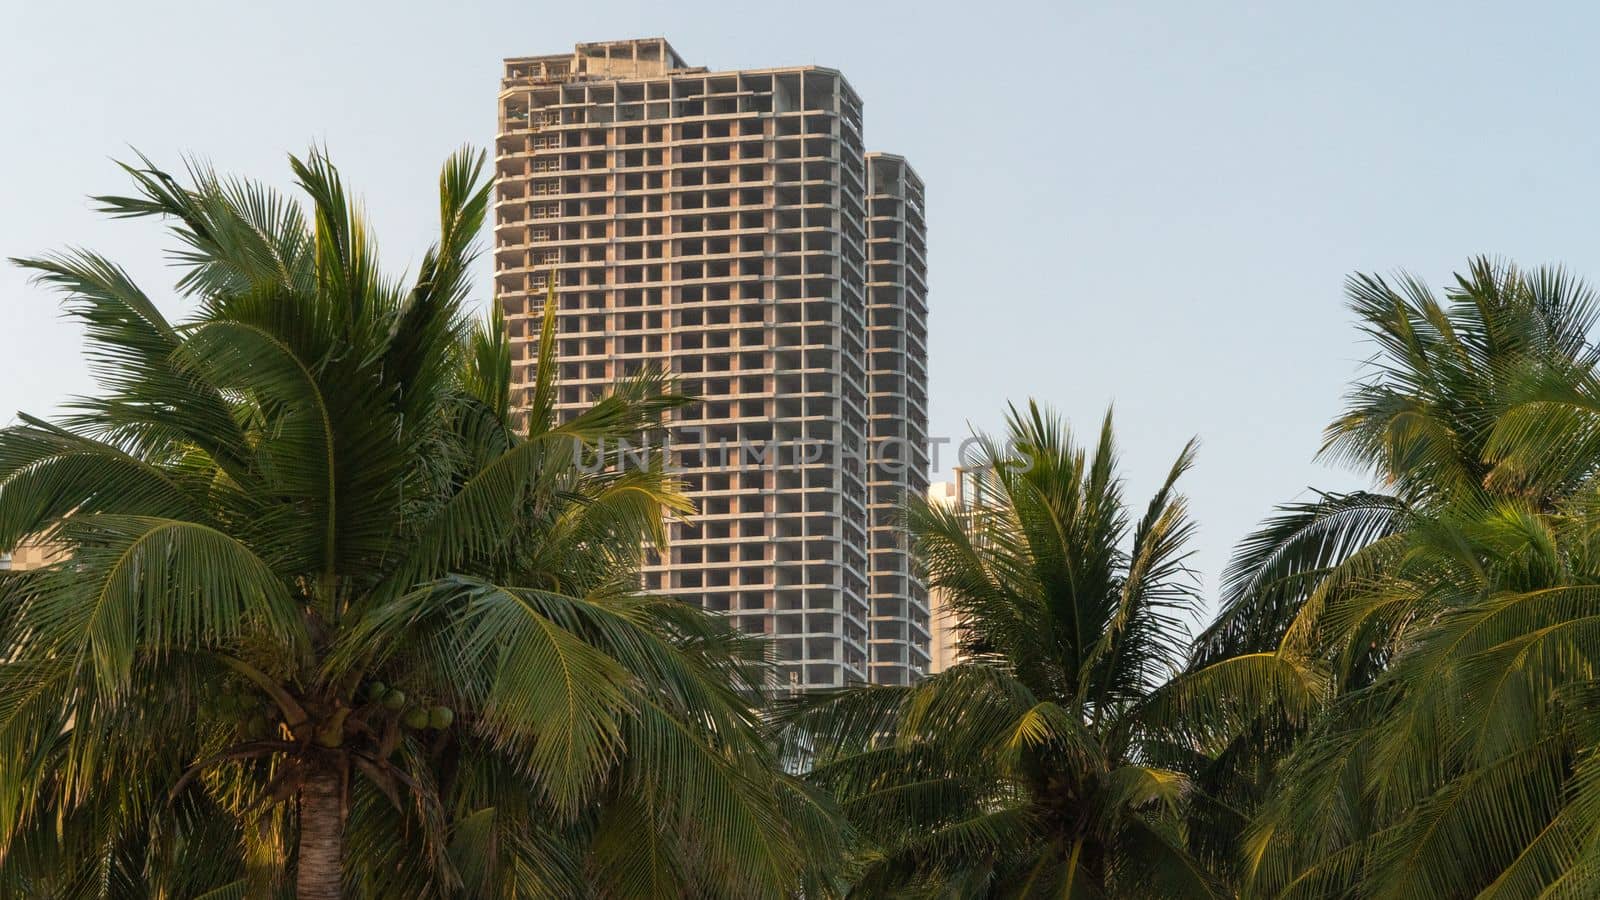 Construction of a tall building against a backdrop of palm trees and sky, unfinished urban architecture. High quality photo